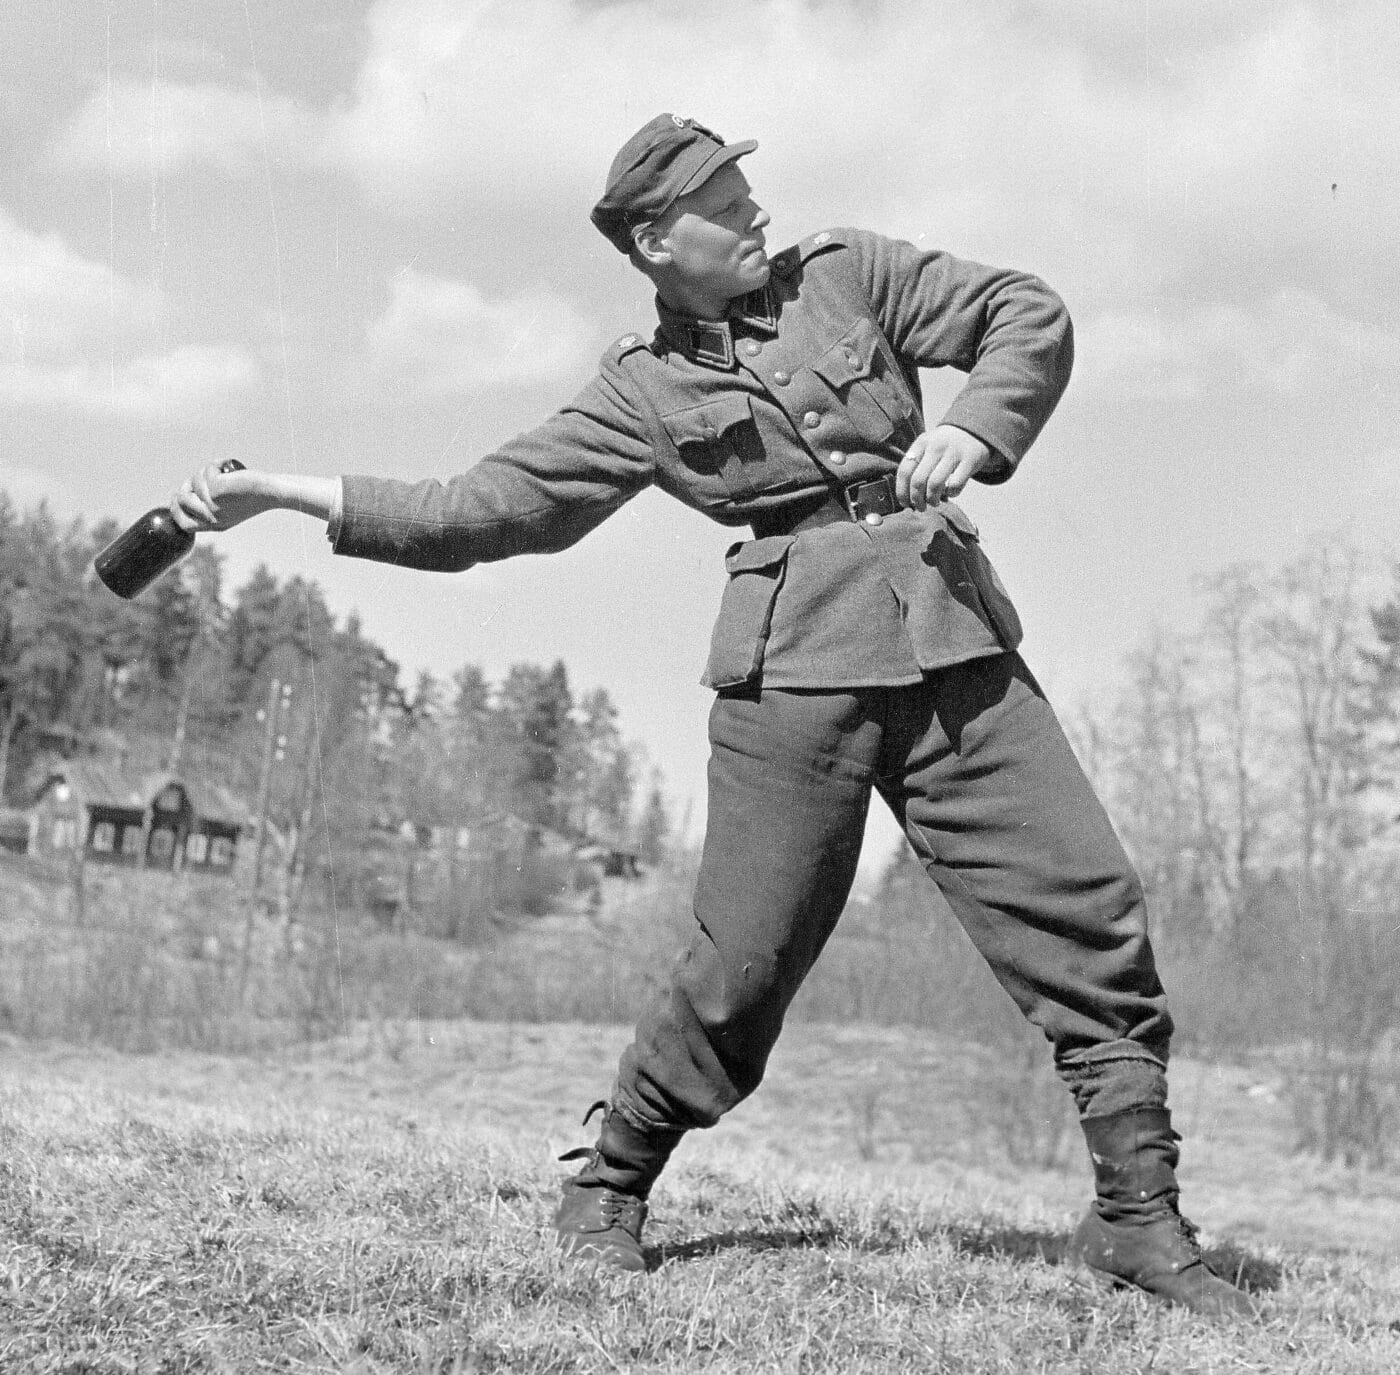 Finnish soldier showing the proper method for throwing a Molotov cocktail